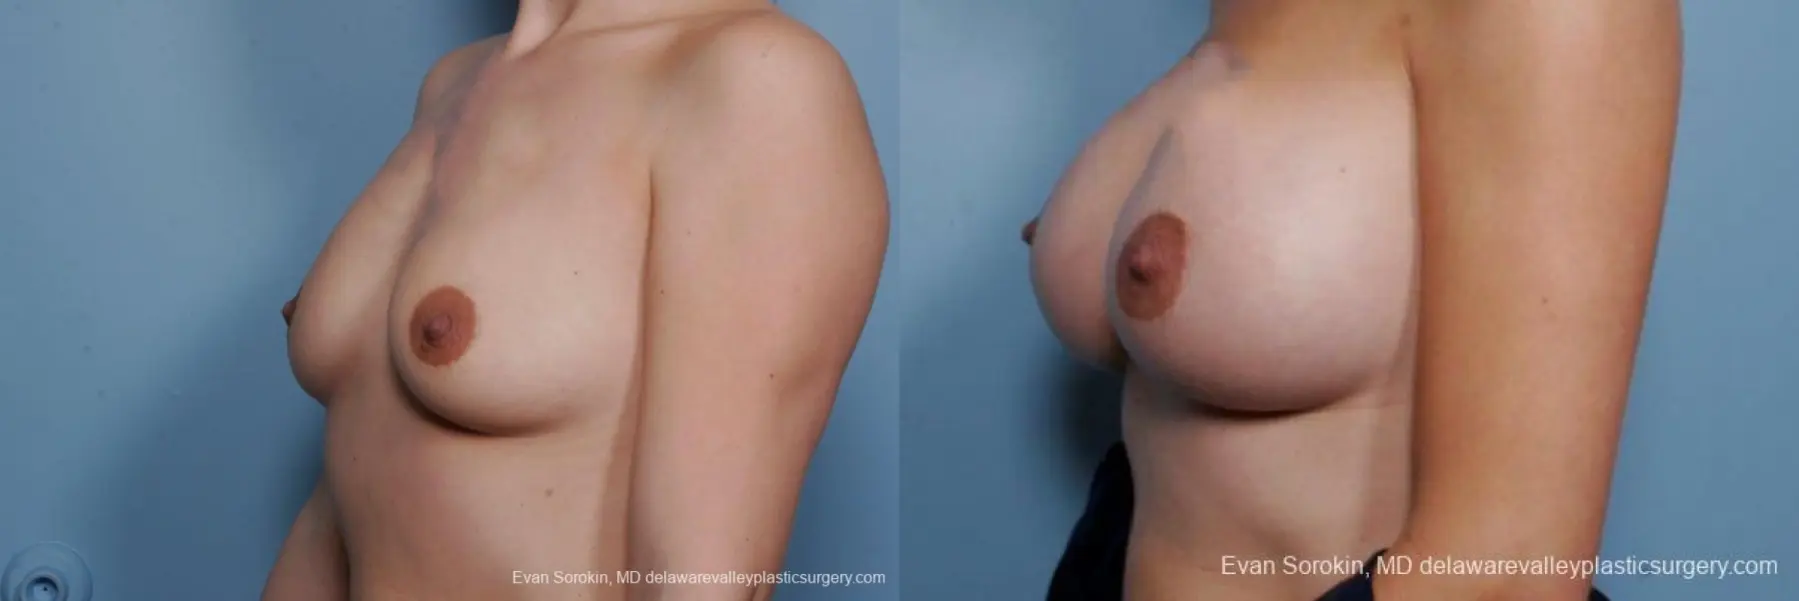 Philadelphia Breast Augmentation 9385 - Before and After 4